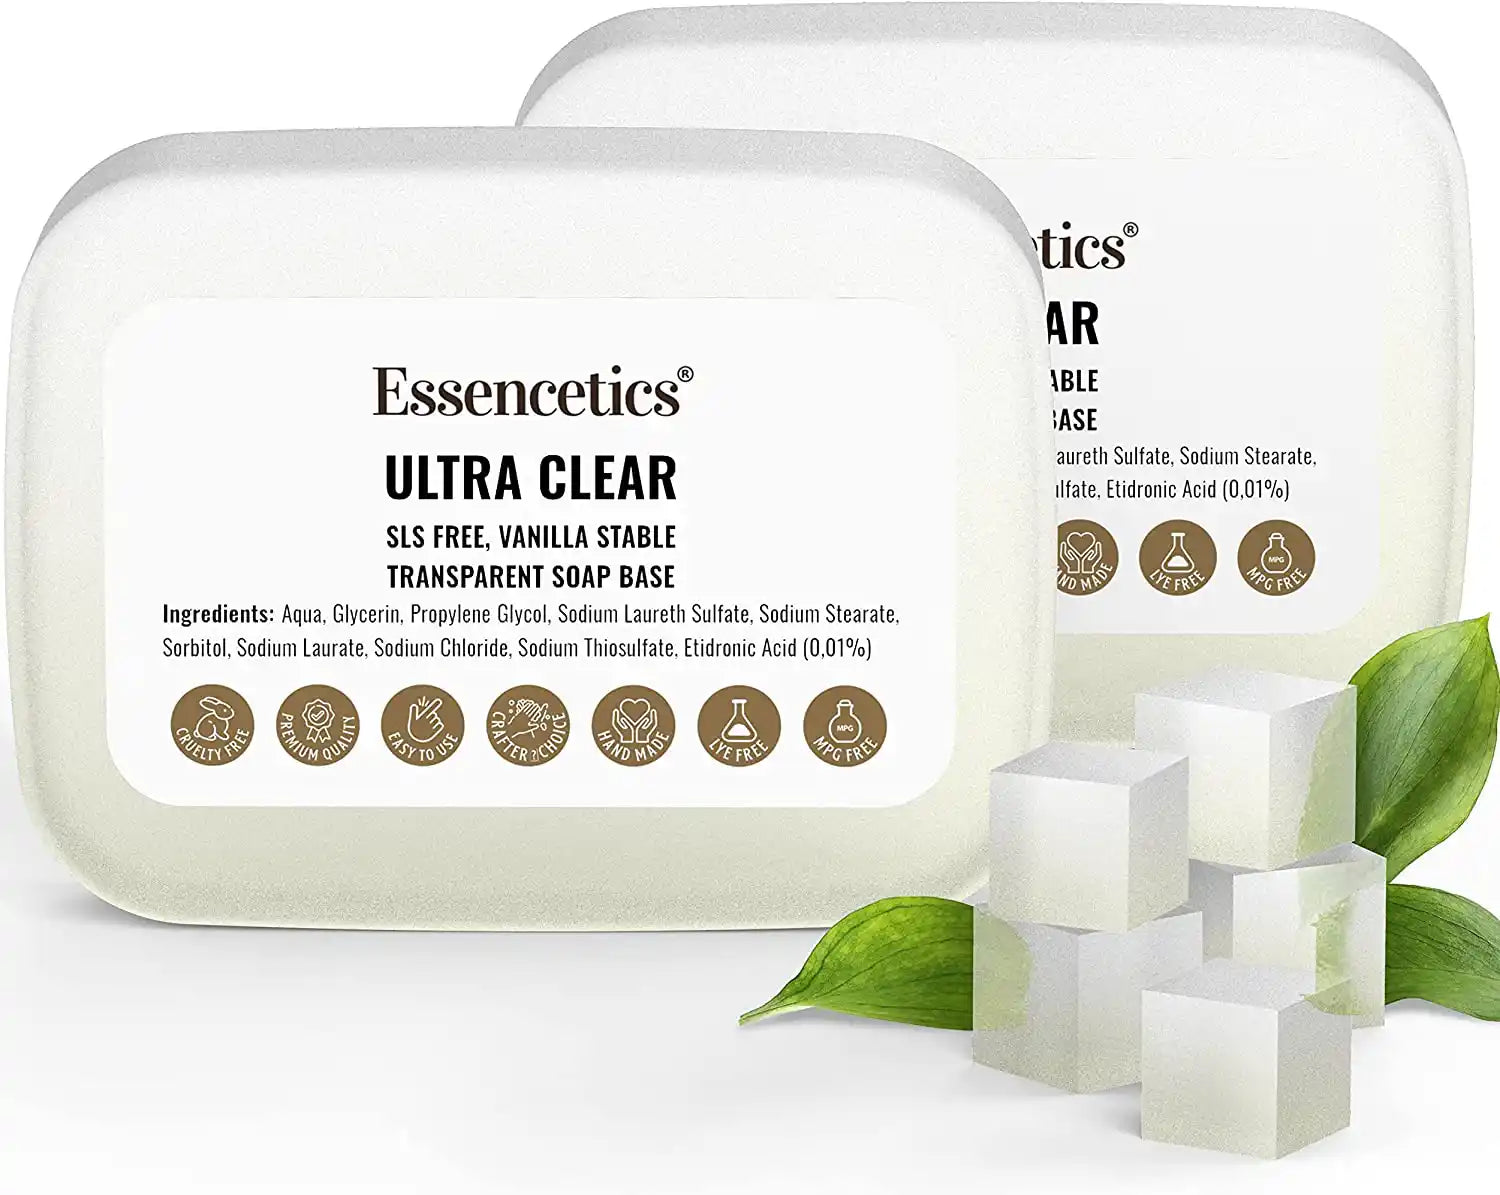 Clear Melt and Pour Soap — The Essential Oil Company